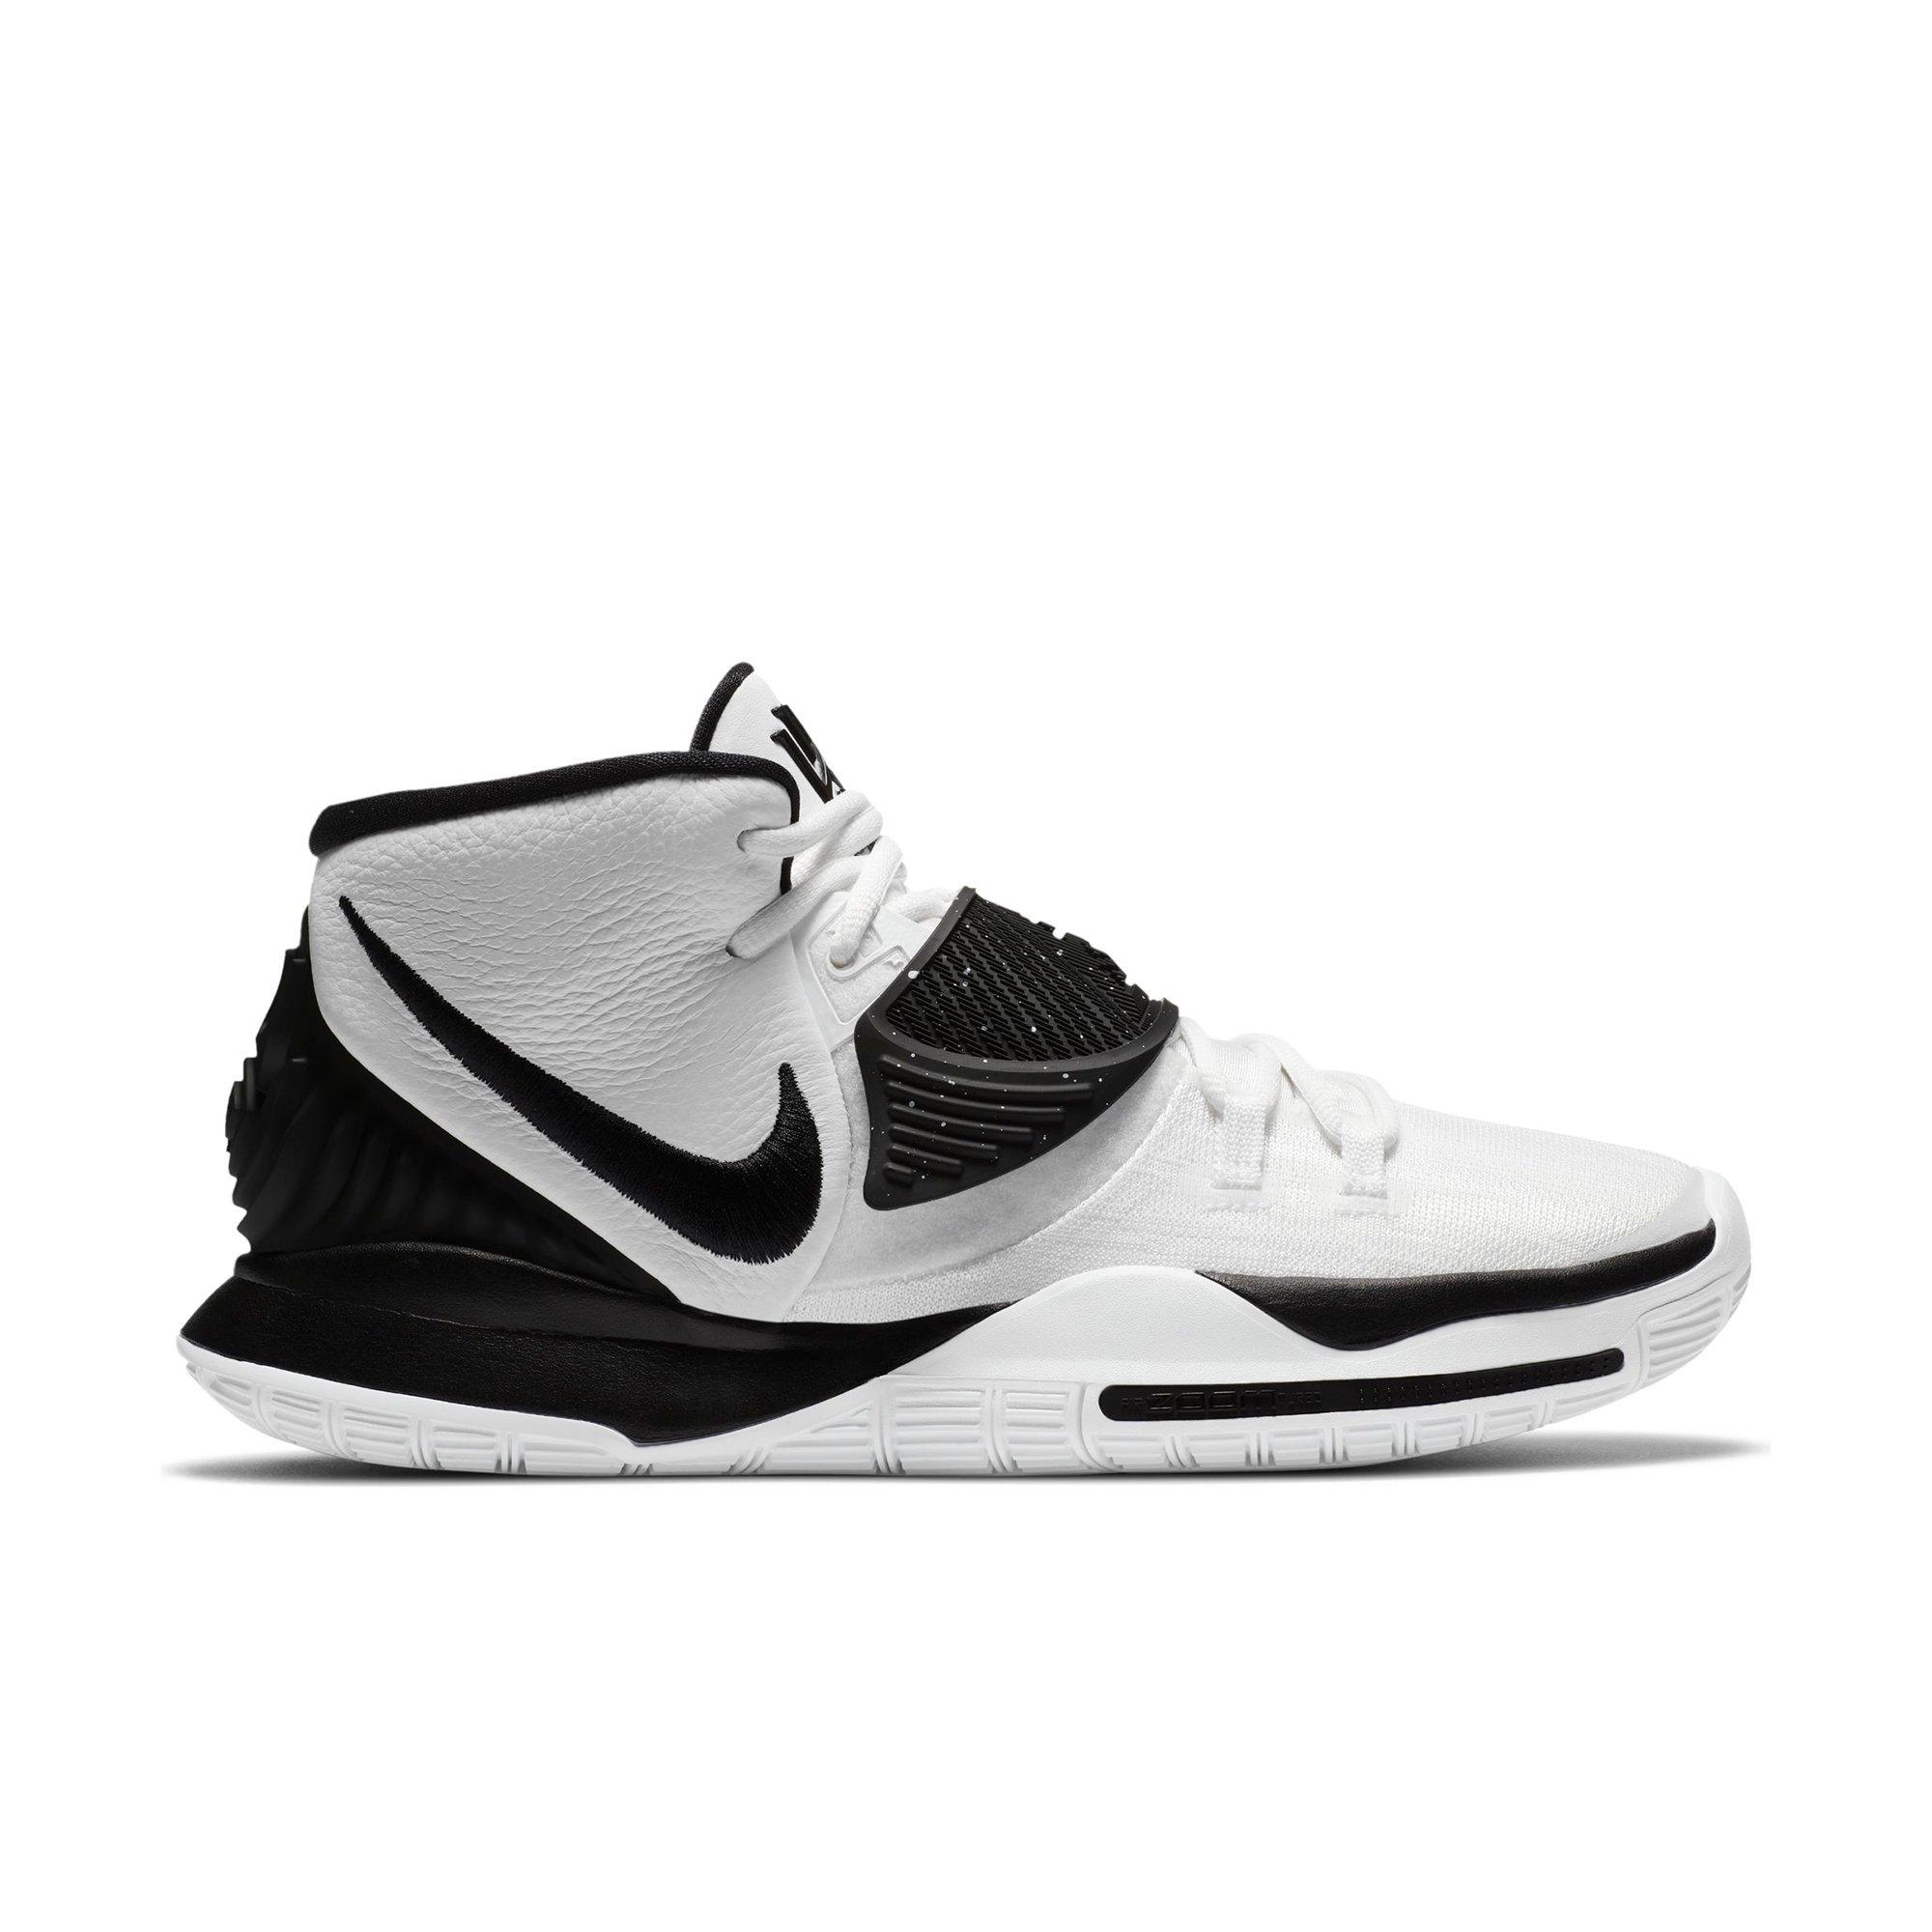 kyrie irving shoes size 6